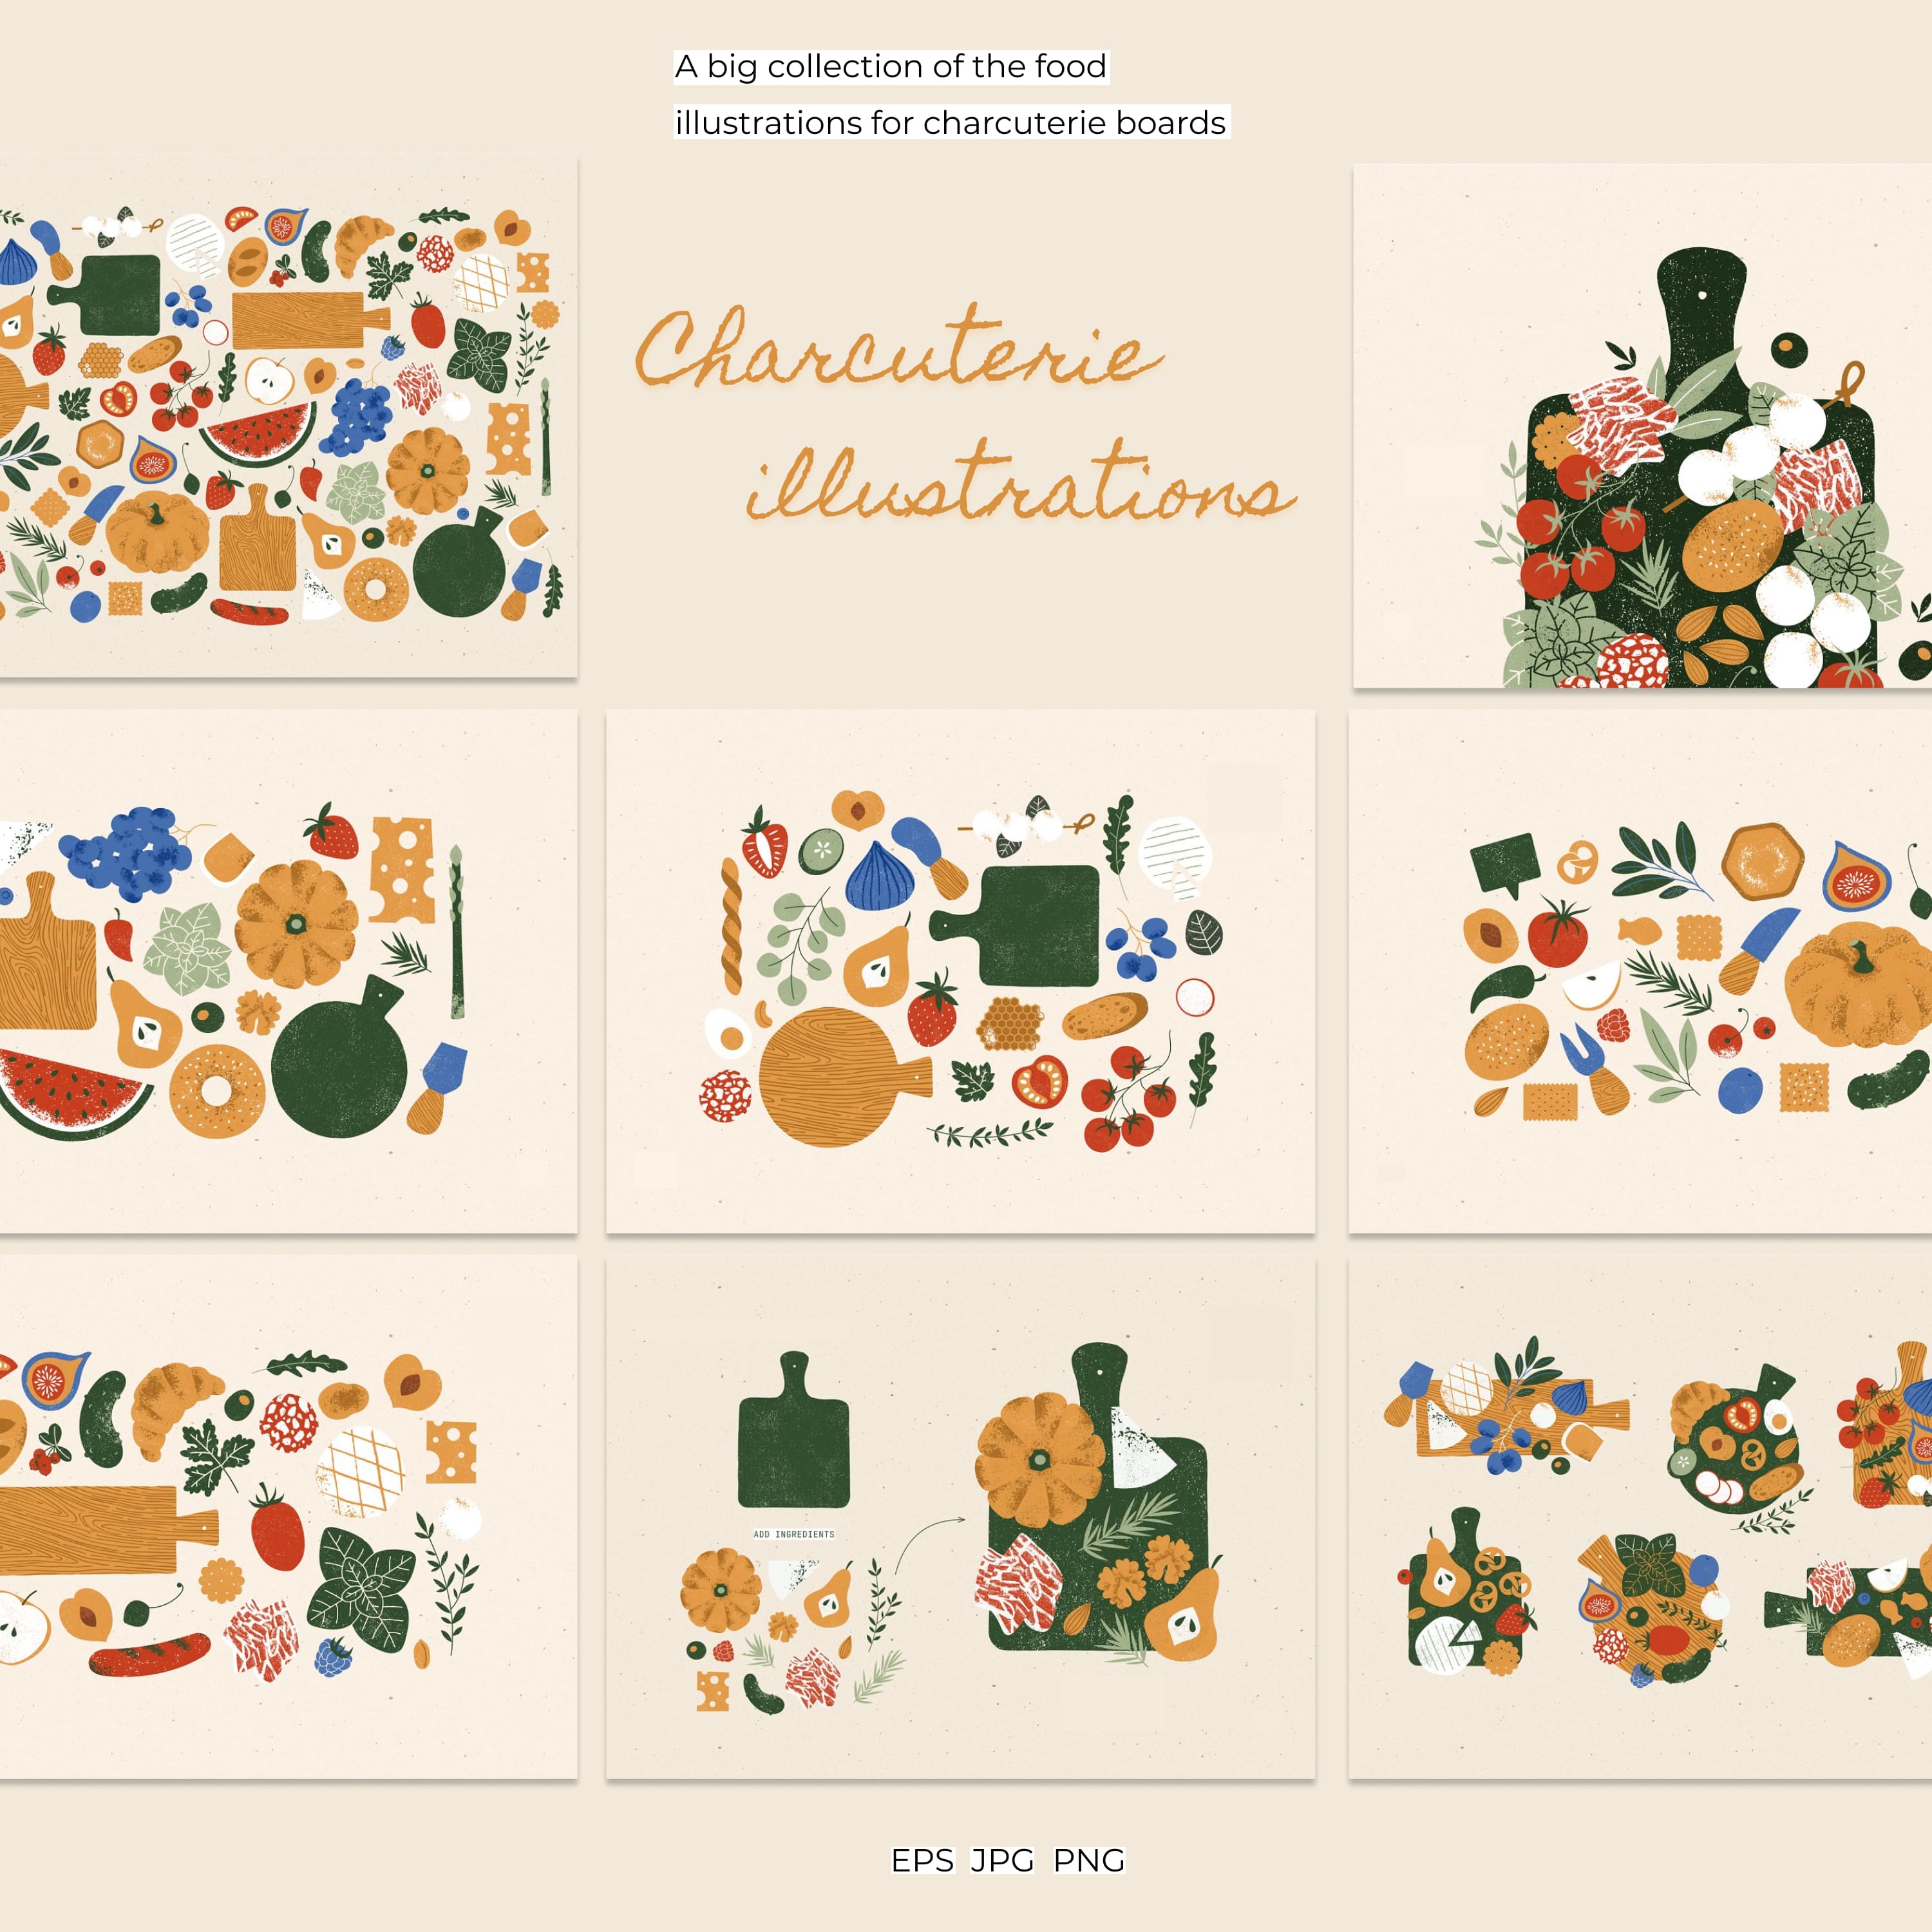 Charcuterie illustrations cover.